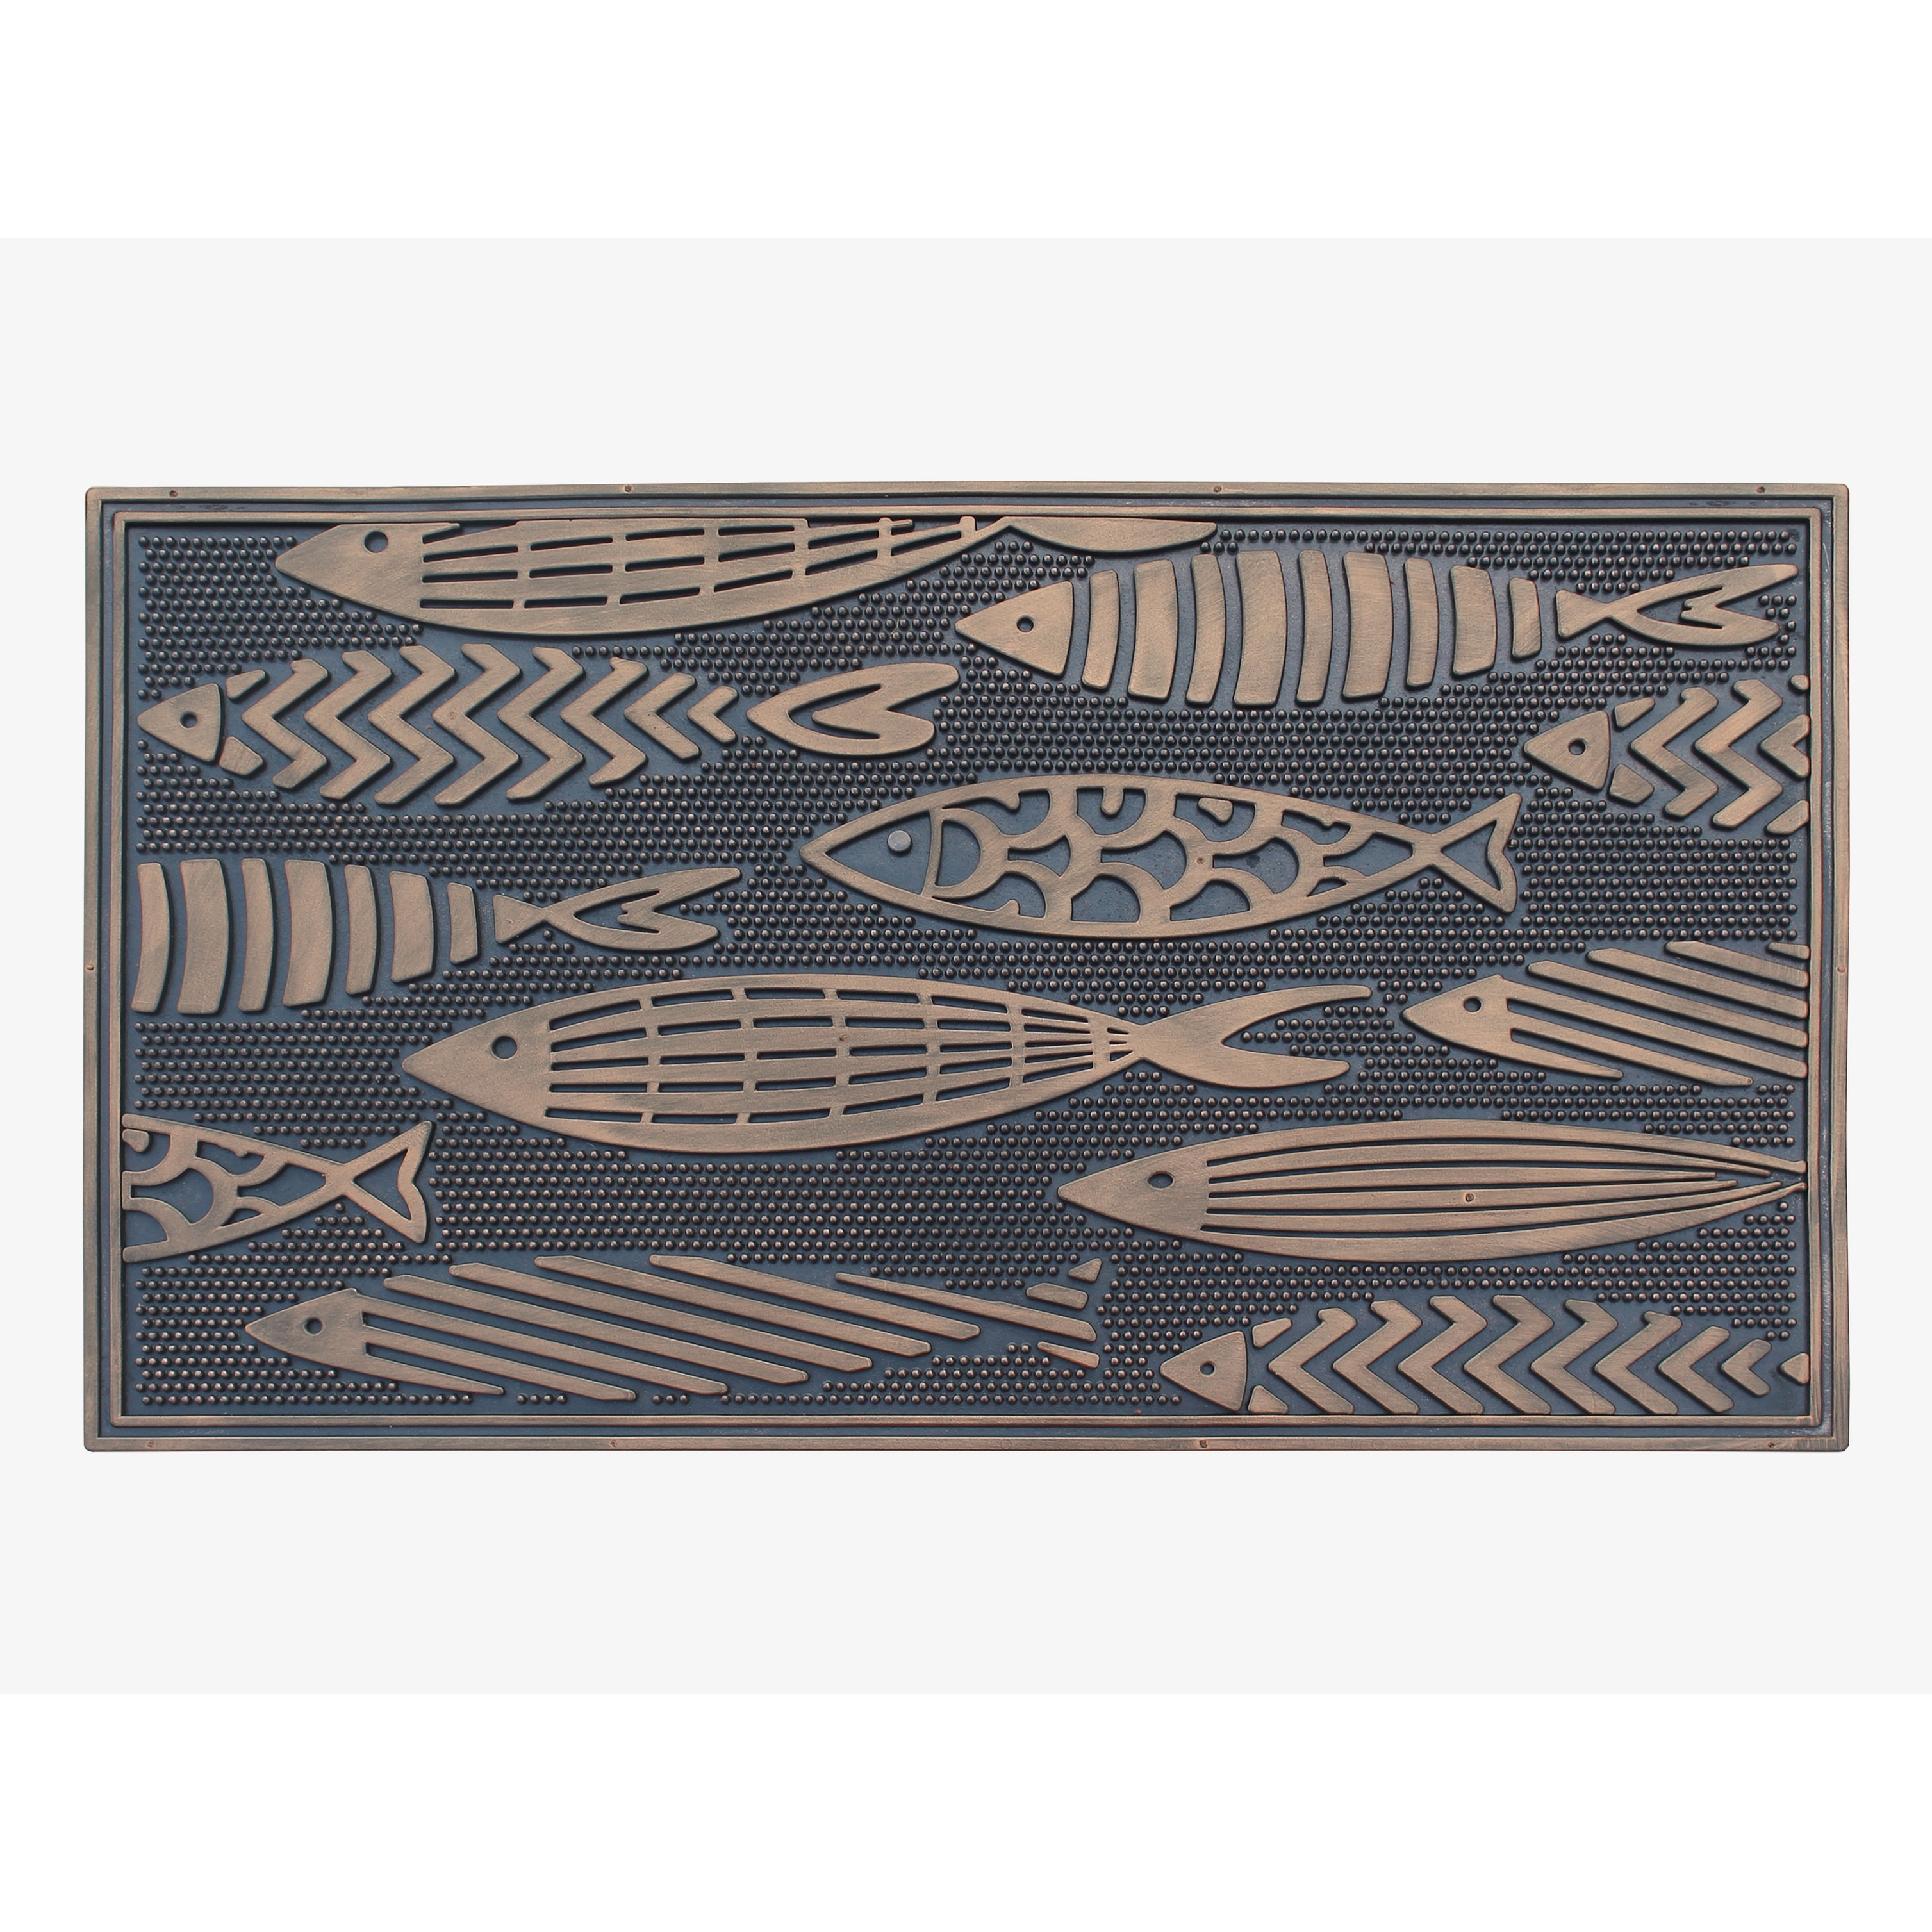 https://ak1.ostkcdn.com/images/products/is/images/direct/08d07da9fa7c94681f1748a70981449c9059528d/Fish-Rubber-Pin-Mat%2C-Beautifully-Copper-Hand-Finished%2C-Non-Slip%2C-Durable-Heavy-Duty-Doormat%2C-18%22-L-X-30%22-W.jpg